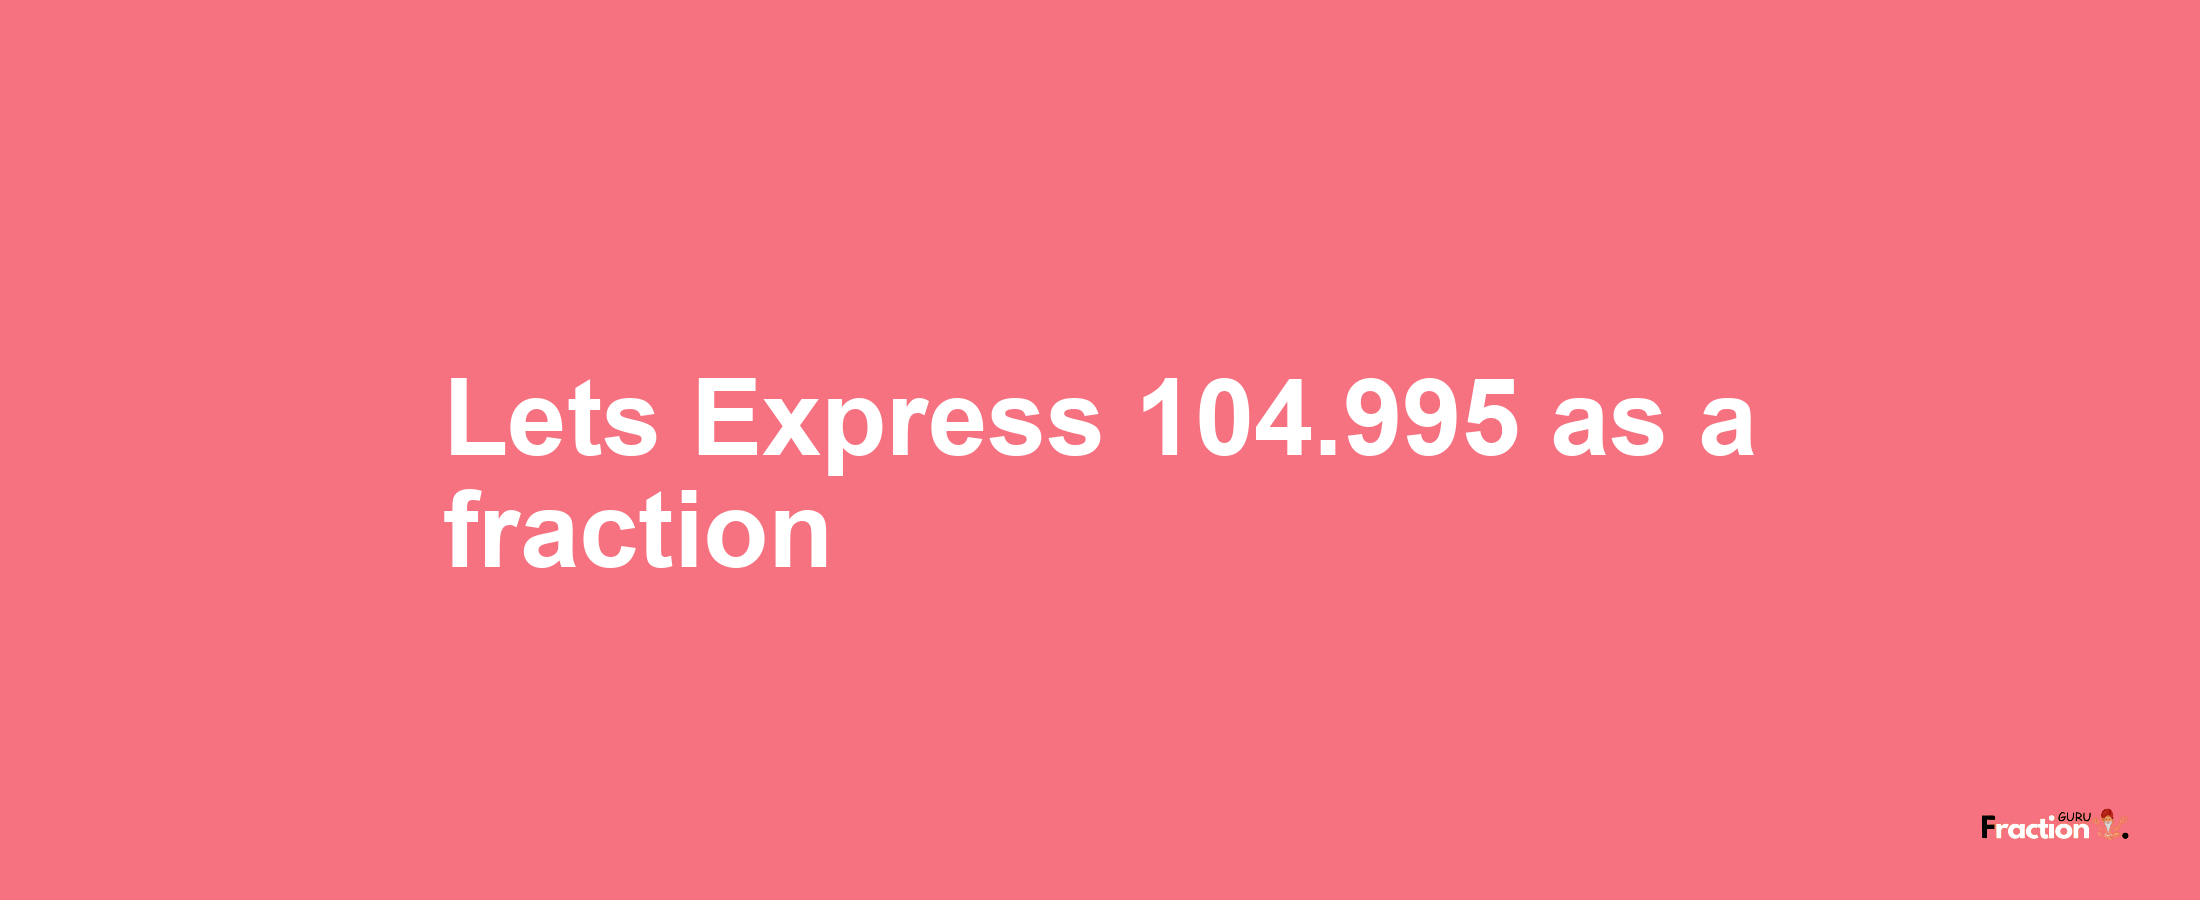 Lets Express 104.995 as afraction